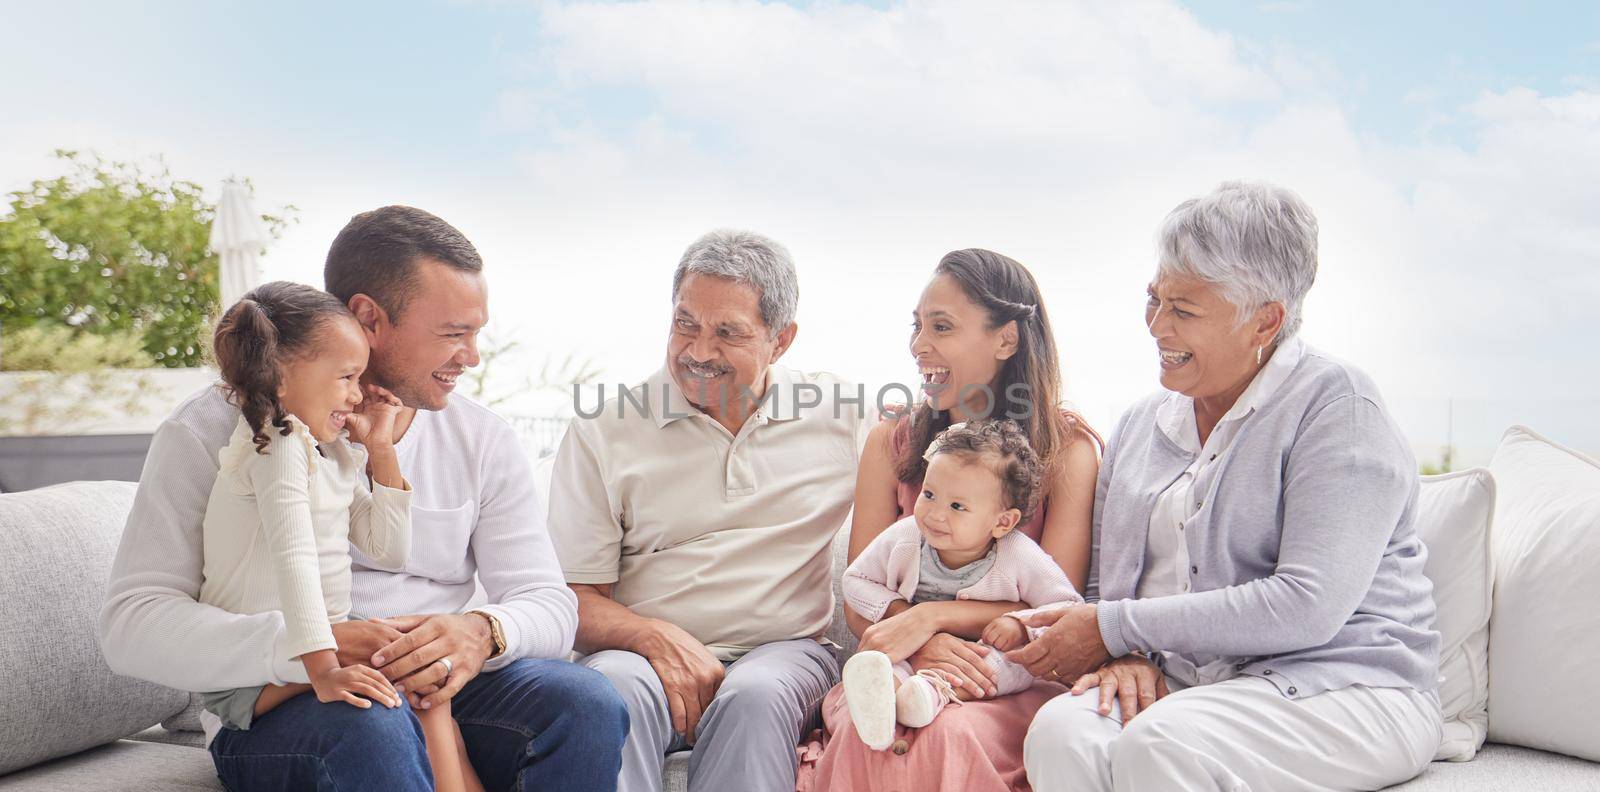 Happy family with children and grandparents talking, communication and conversation on couch outdoor in family home. Big family of elderly retirement people, love and young kids smile together.